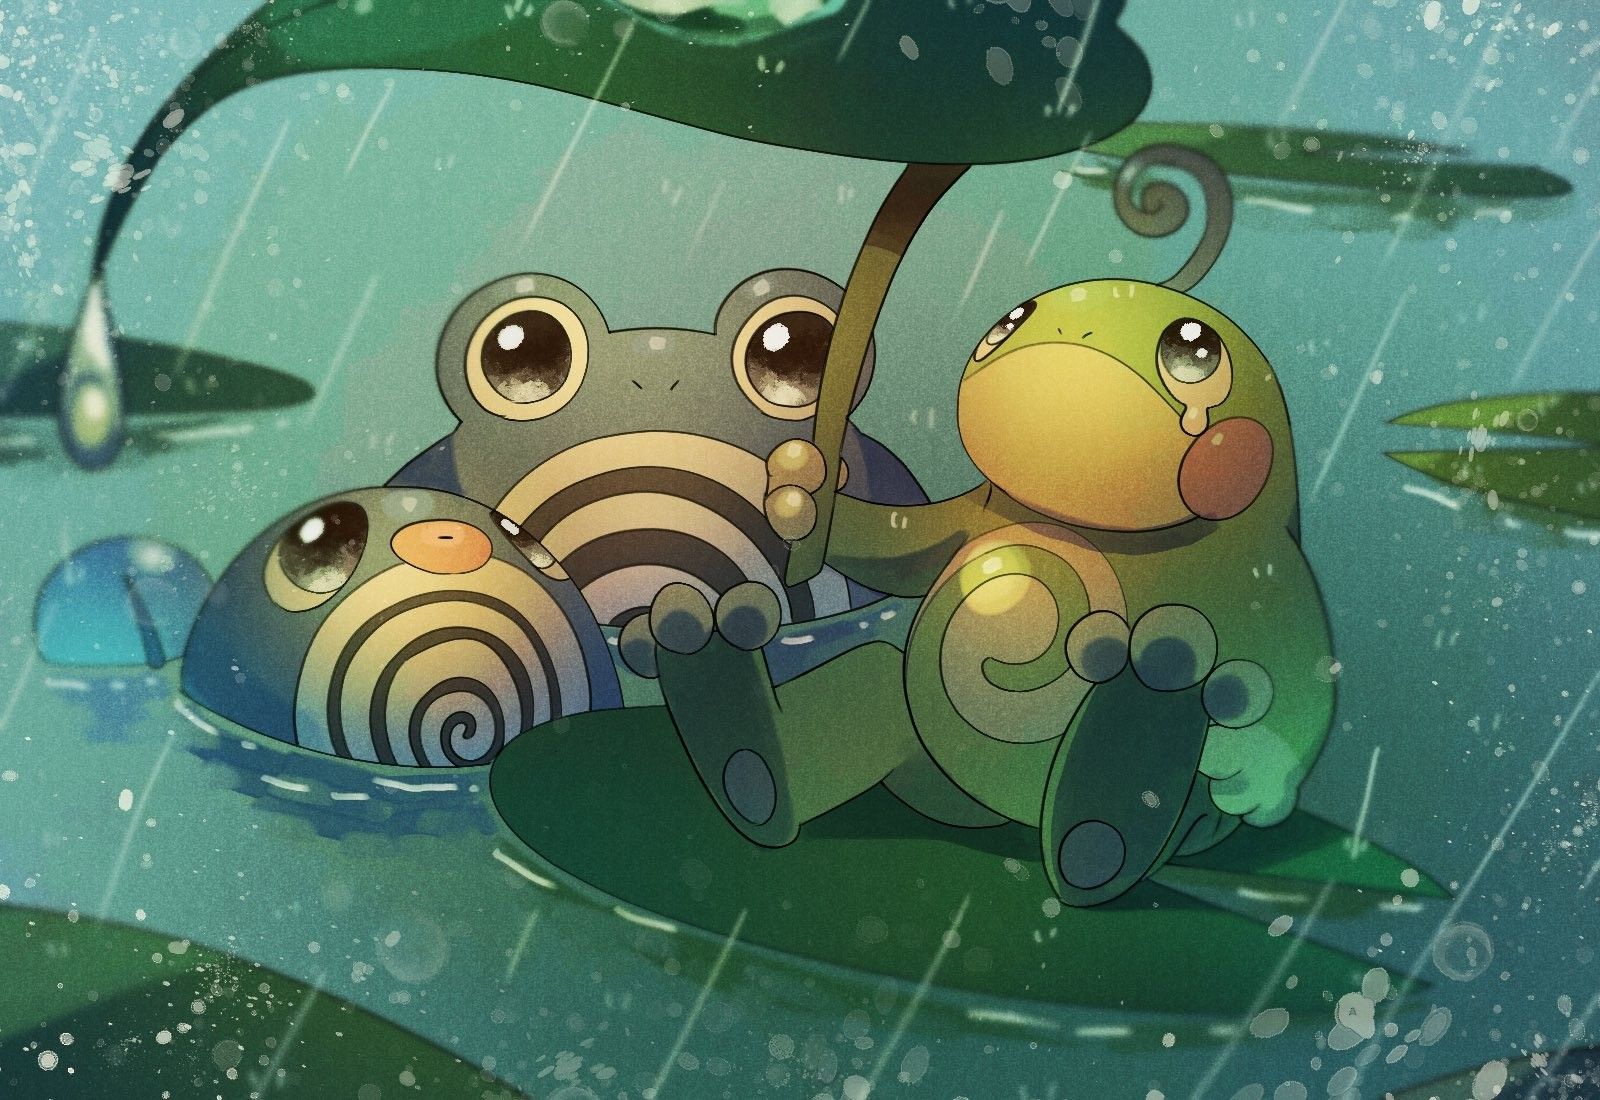 Poliwrath Hd Wallpapers